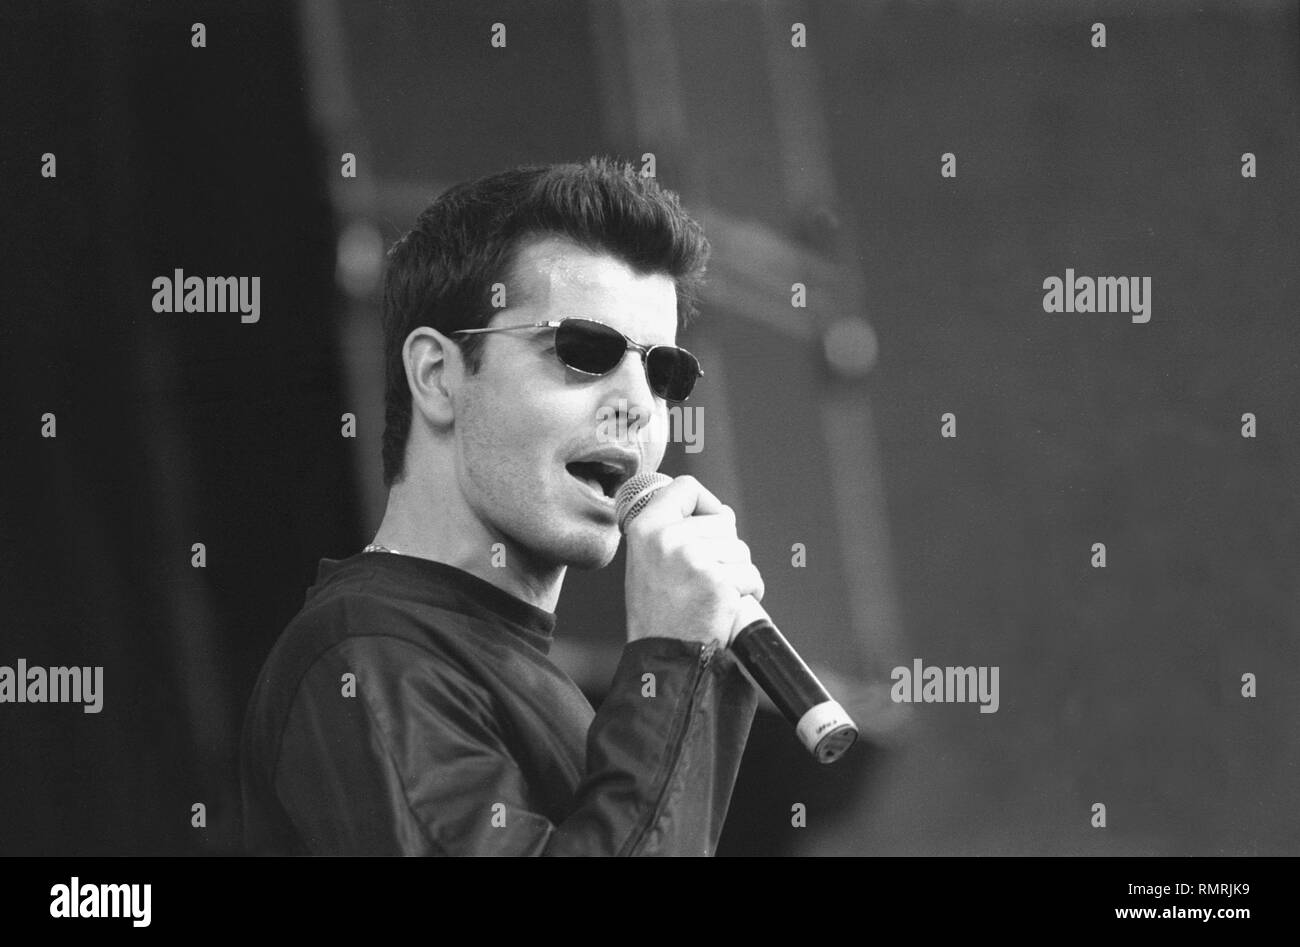 Singer, songwriter and actor Jordan Knight, best known as a singer in the boy band, New Kids on the Block (NKOTB), is shown performing on stage during a concert appearance with his solo band. Stock Photo